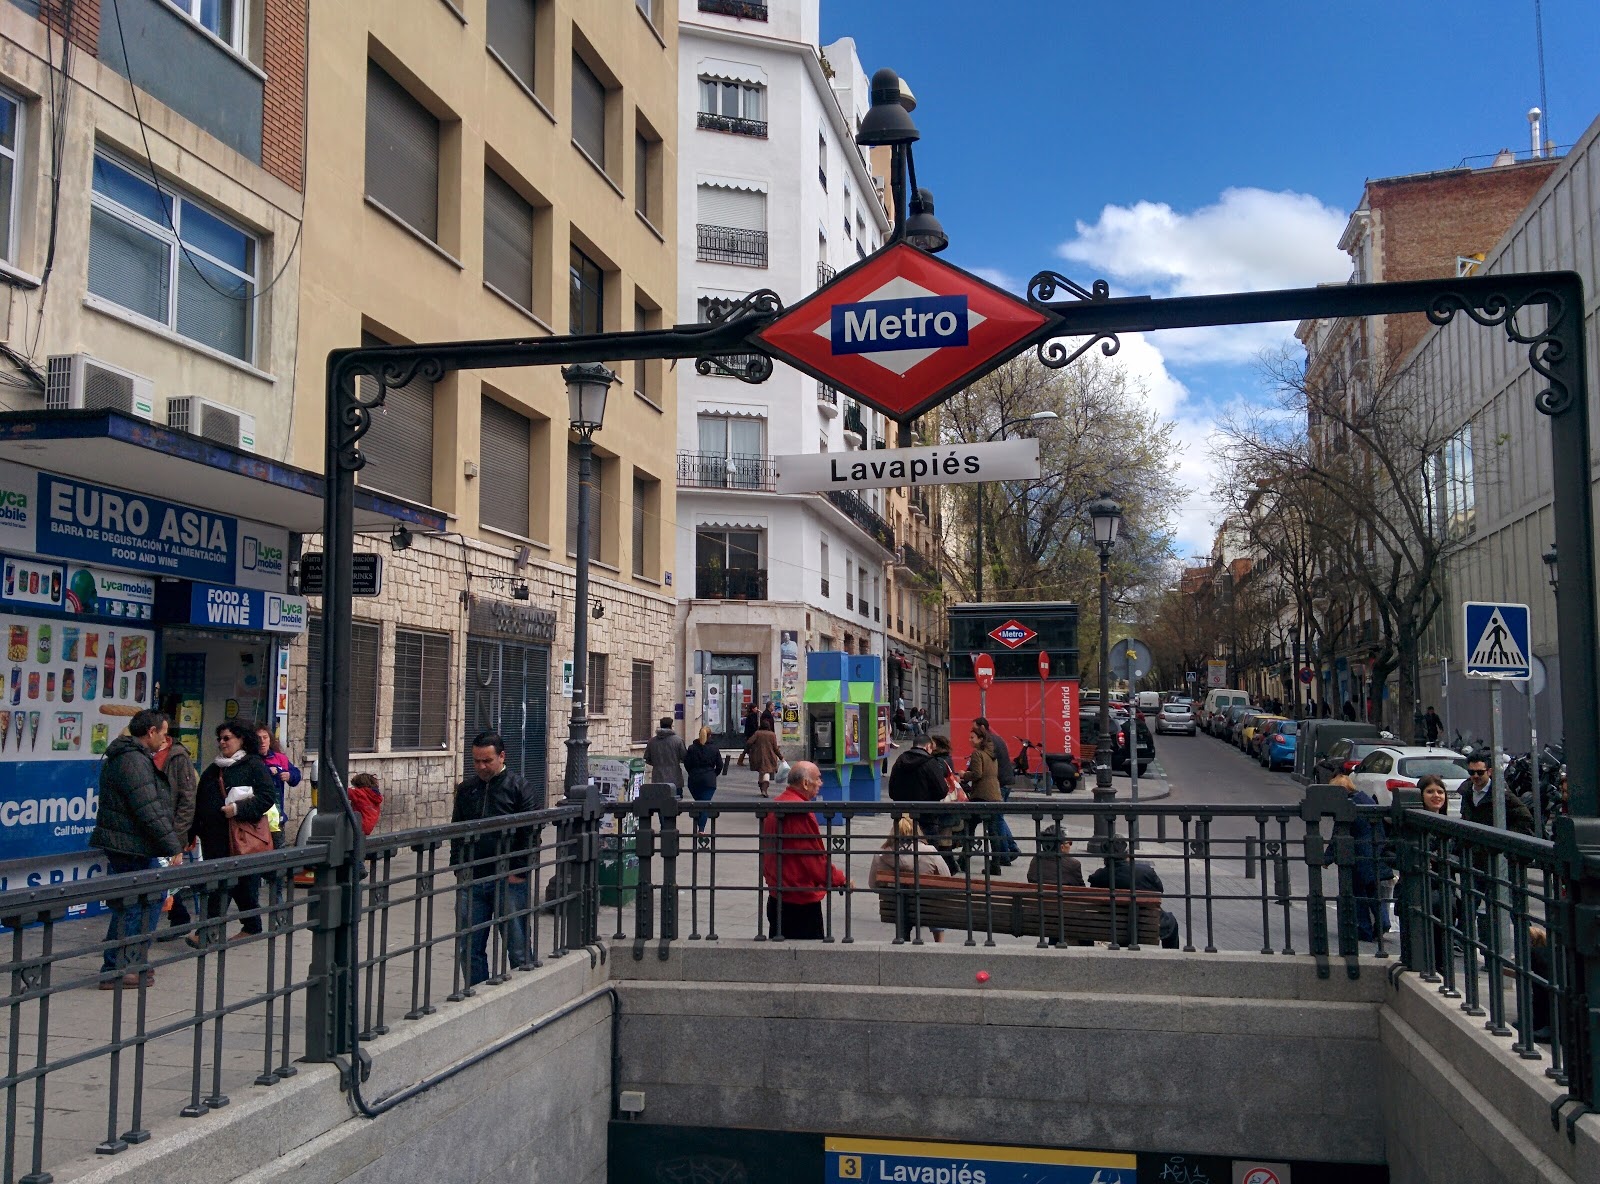 Our Moose In A Box: The Madrid Metro